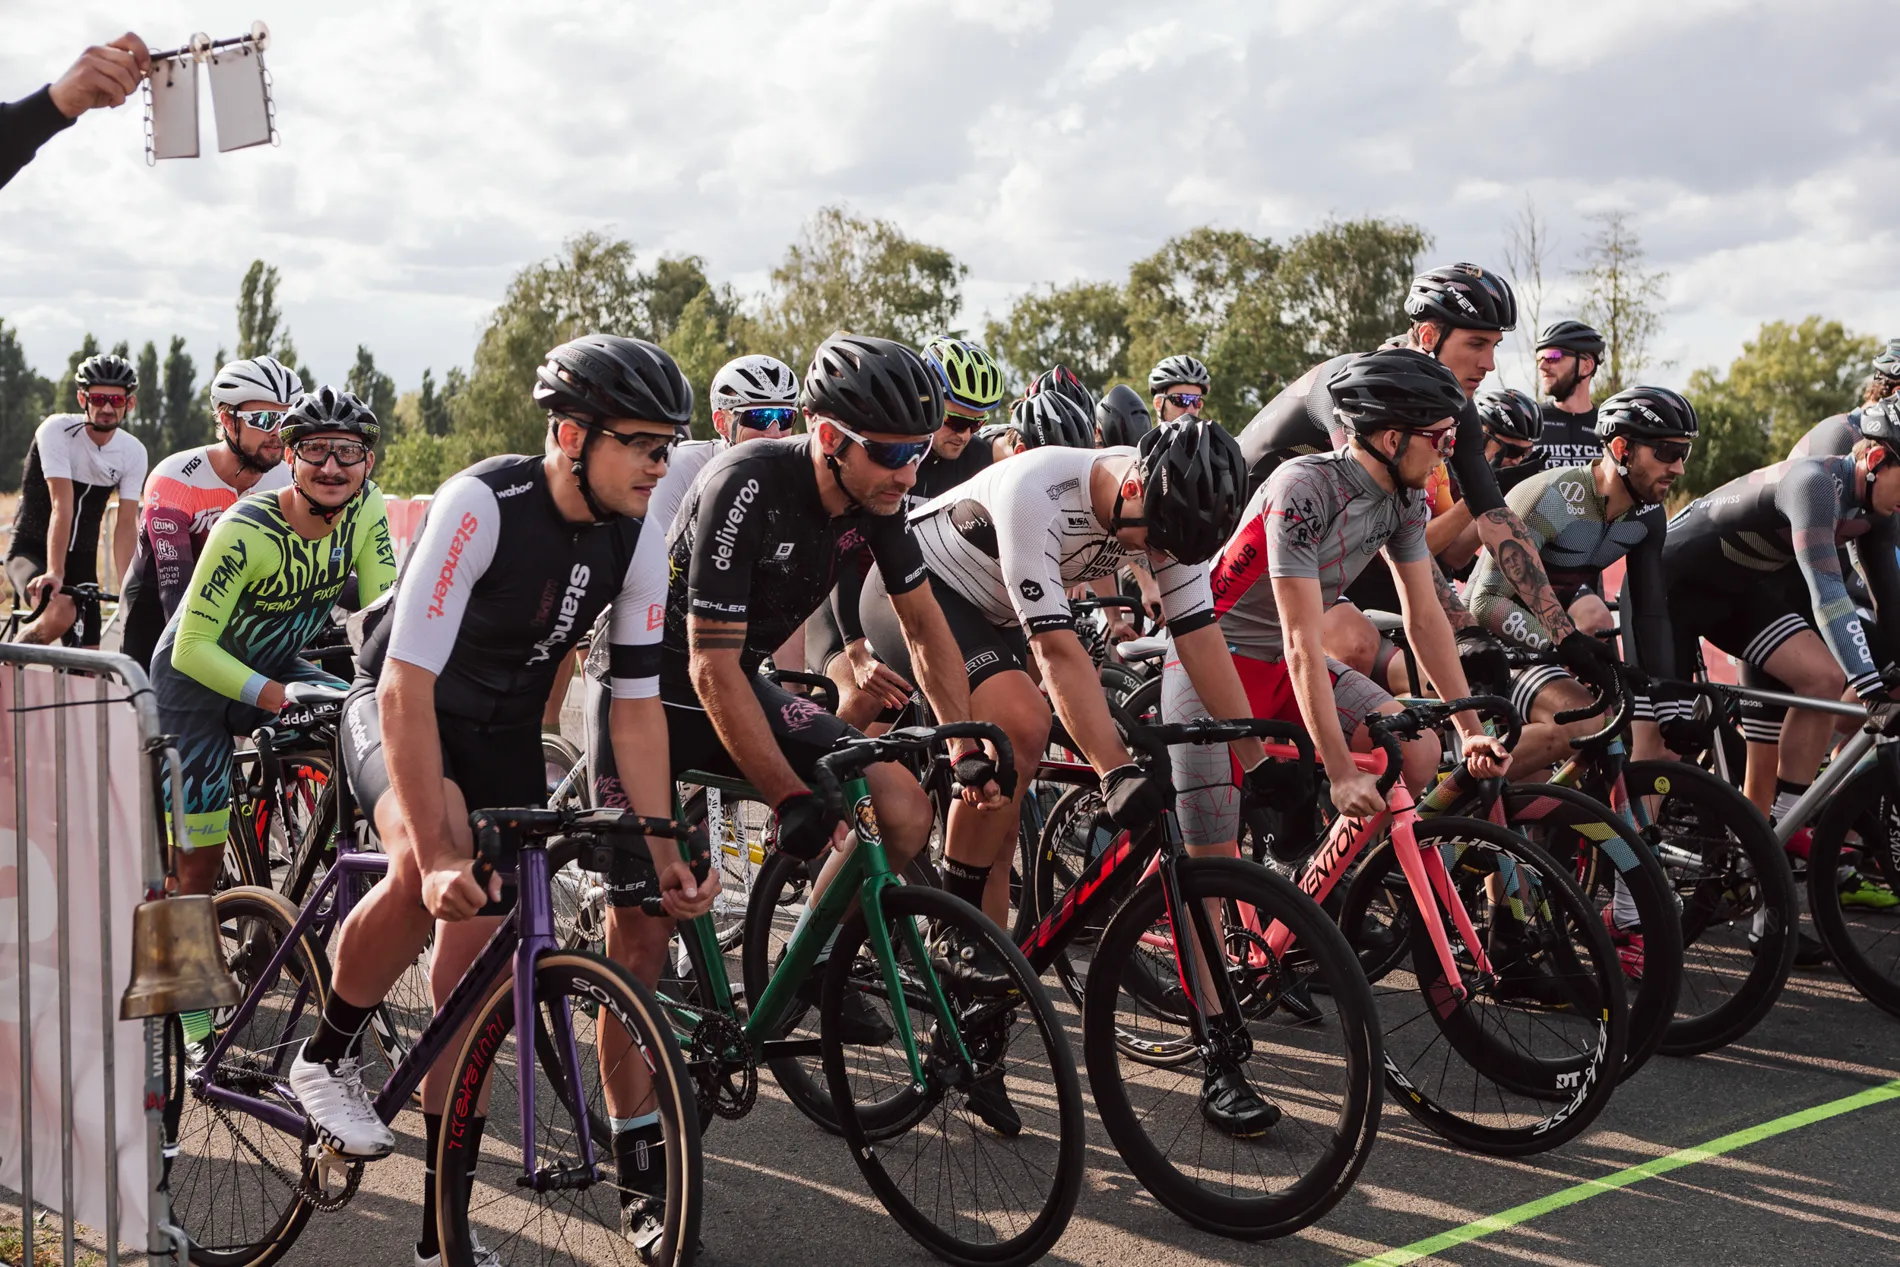 The SBSB Crit organized by Standert Bicycles and Stone Brew Berlin